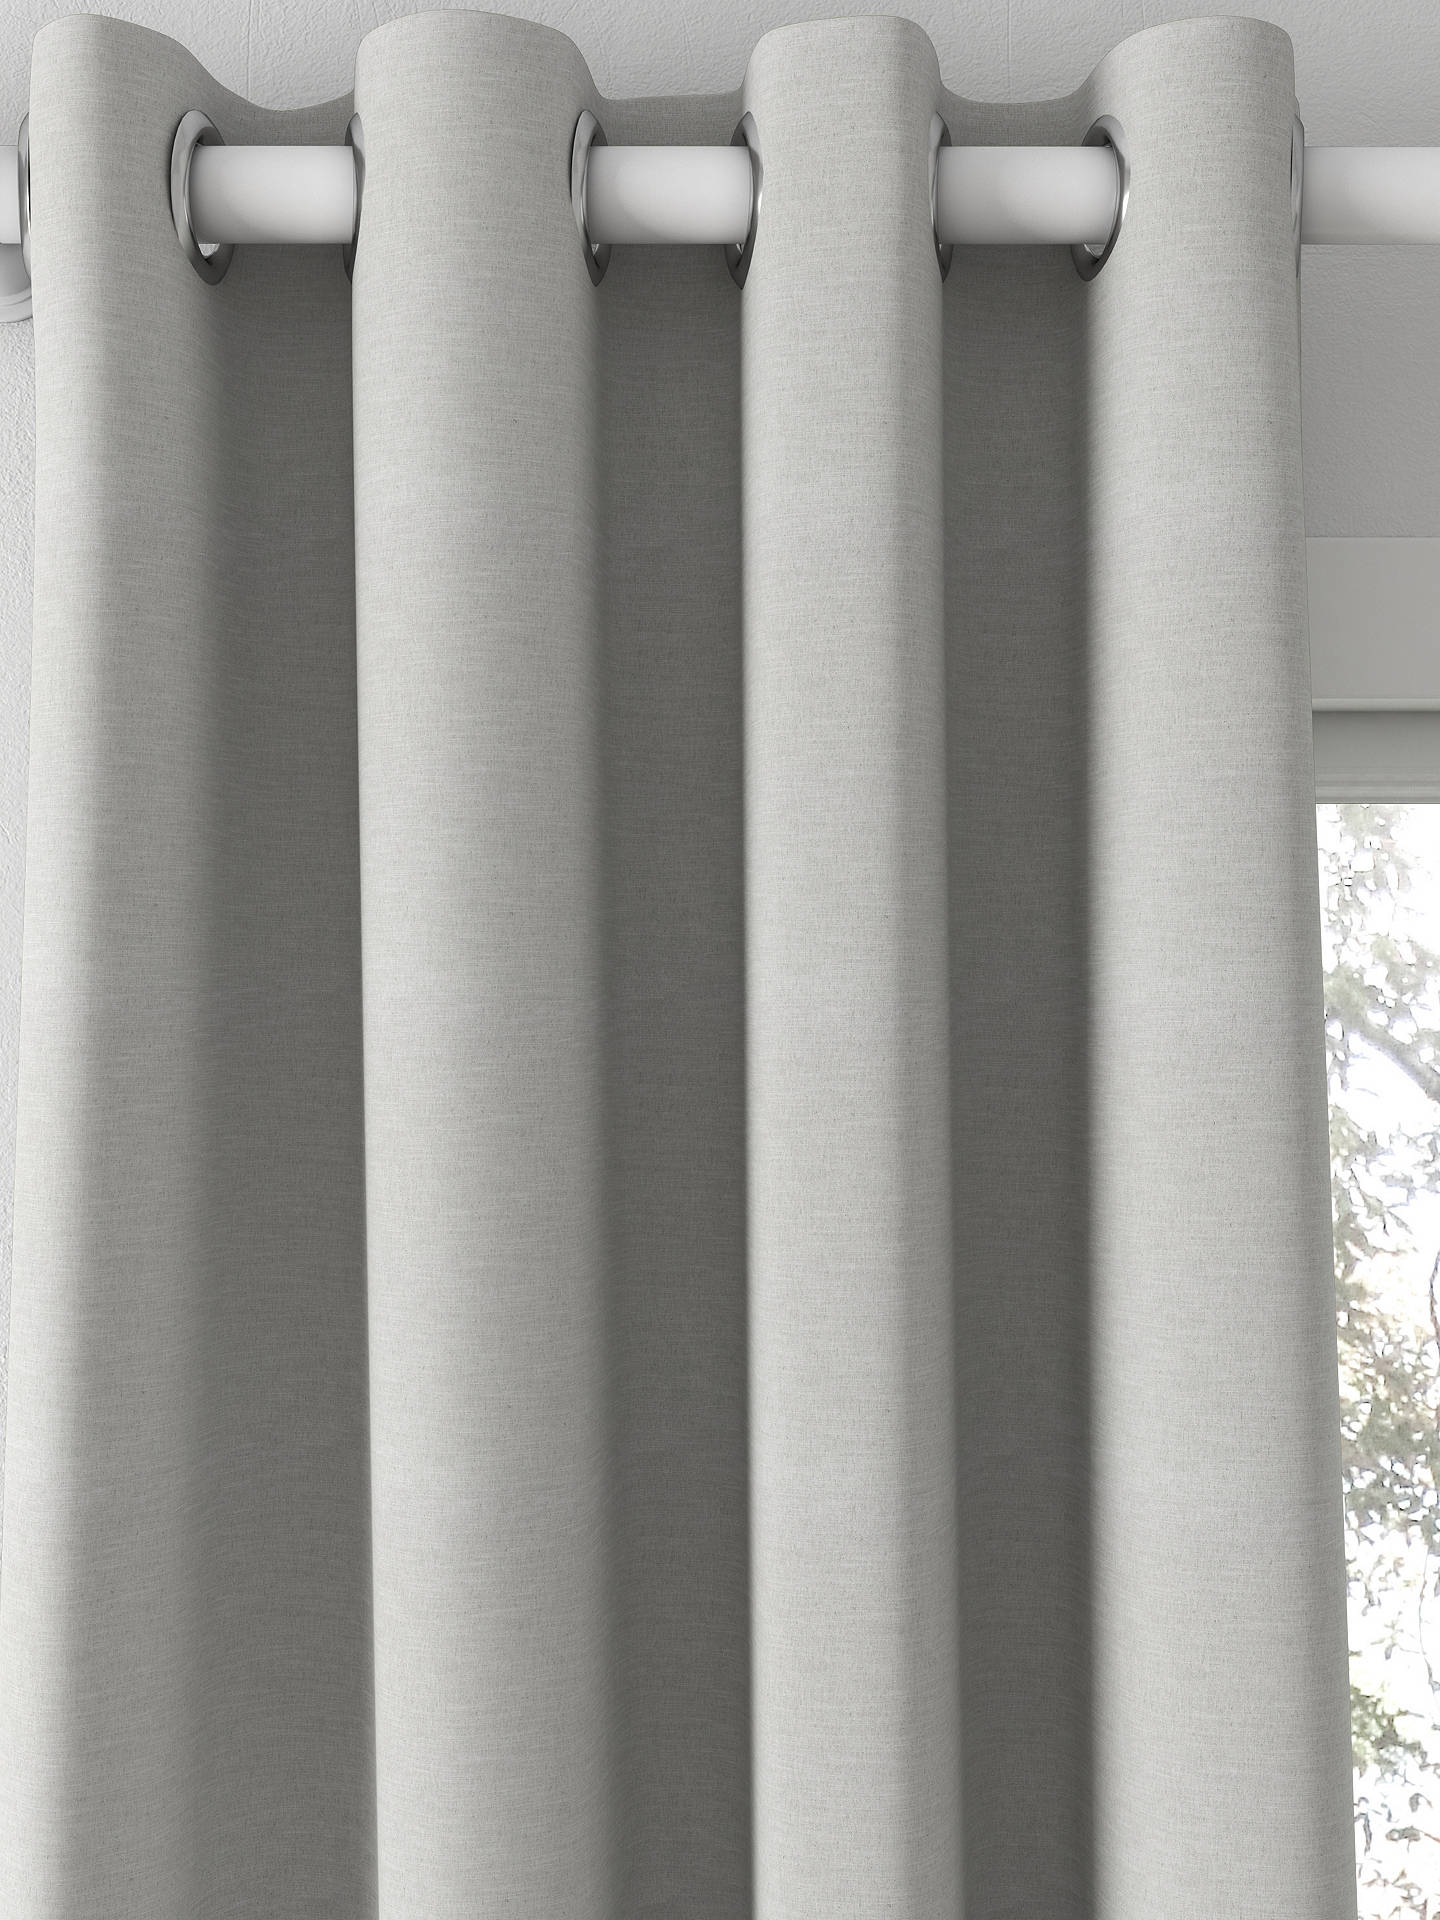 Laura Ashley Swanson Made to Measure Curtains, Steel